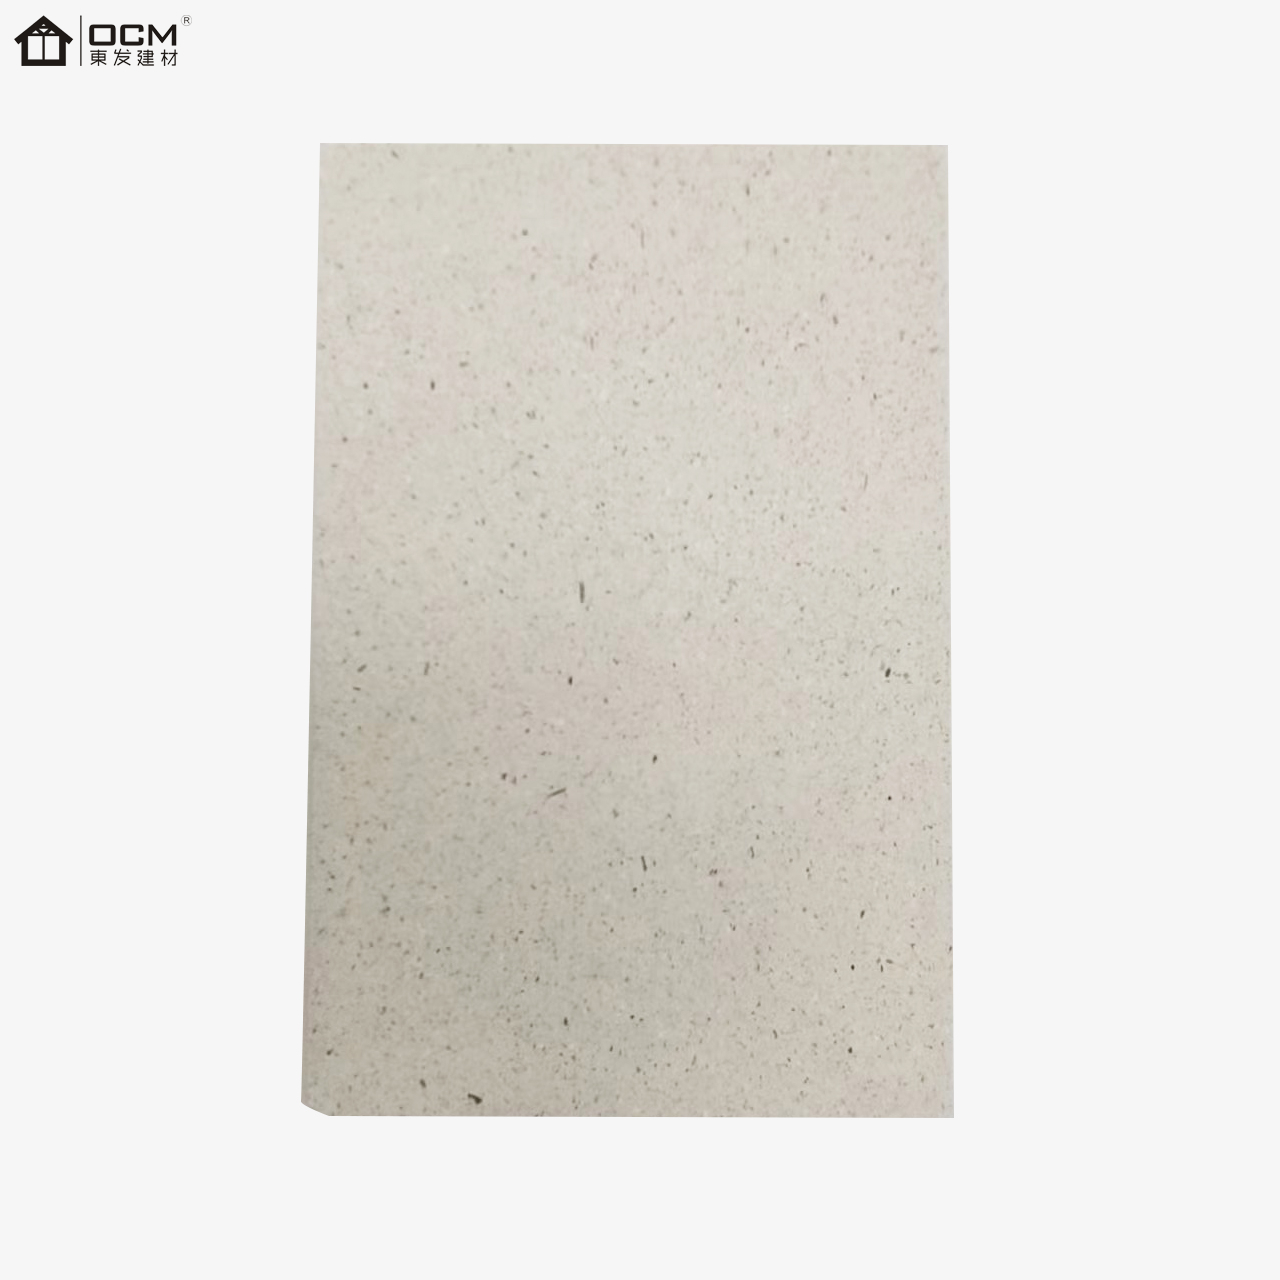 High Density Grade A1 Fireproof Magnesium Oxide Sulfate Sanded Board